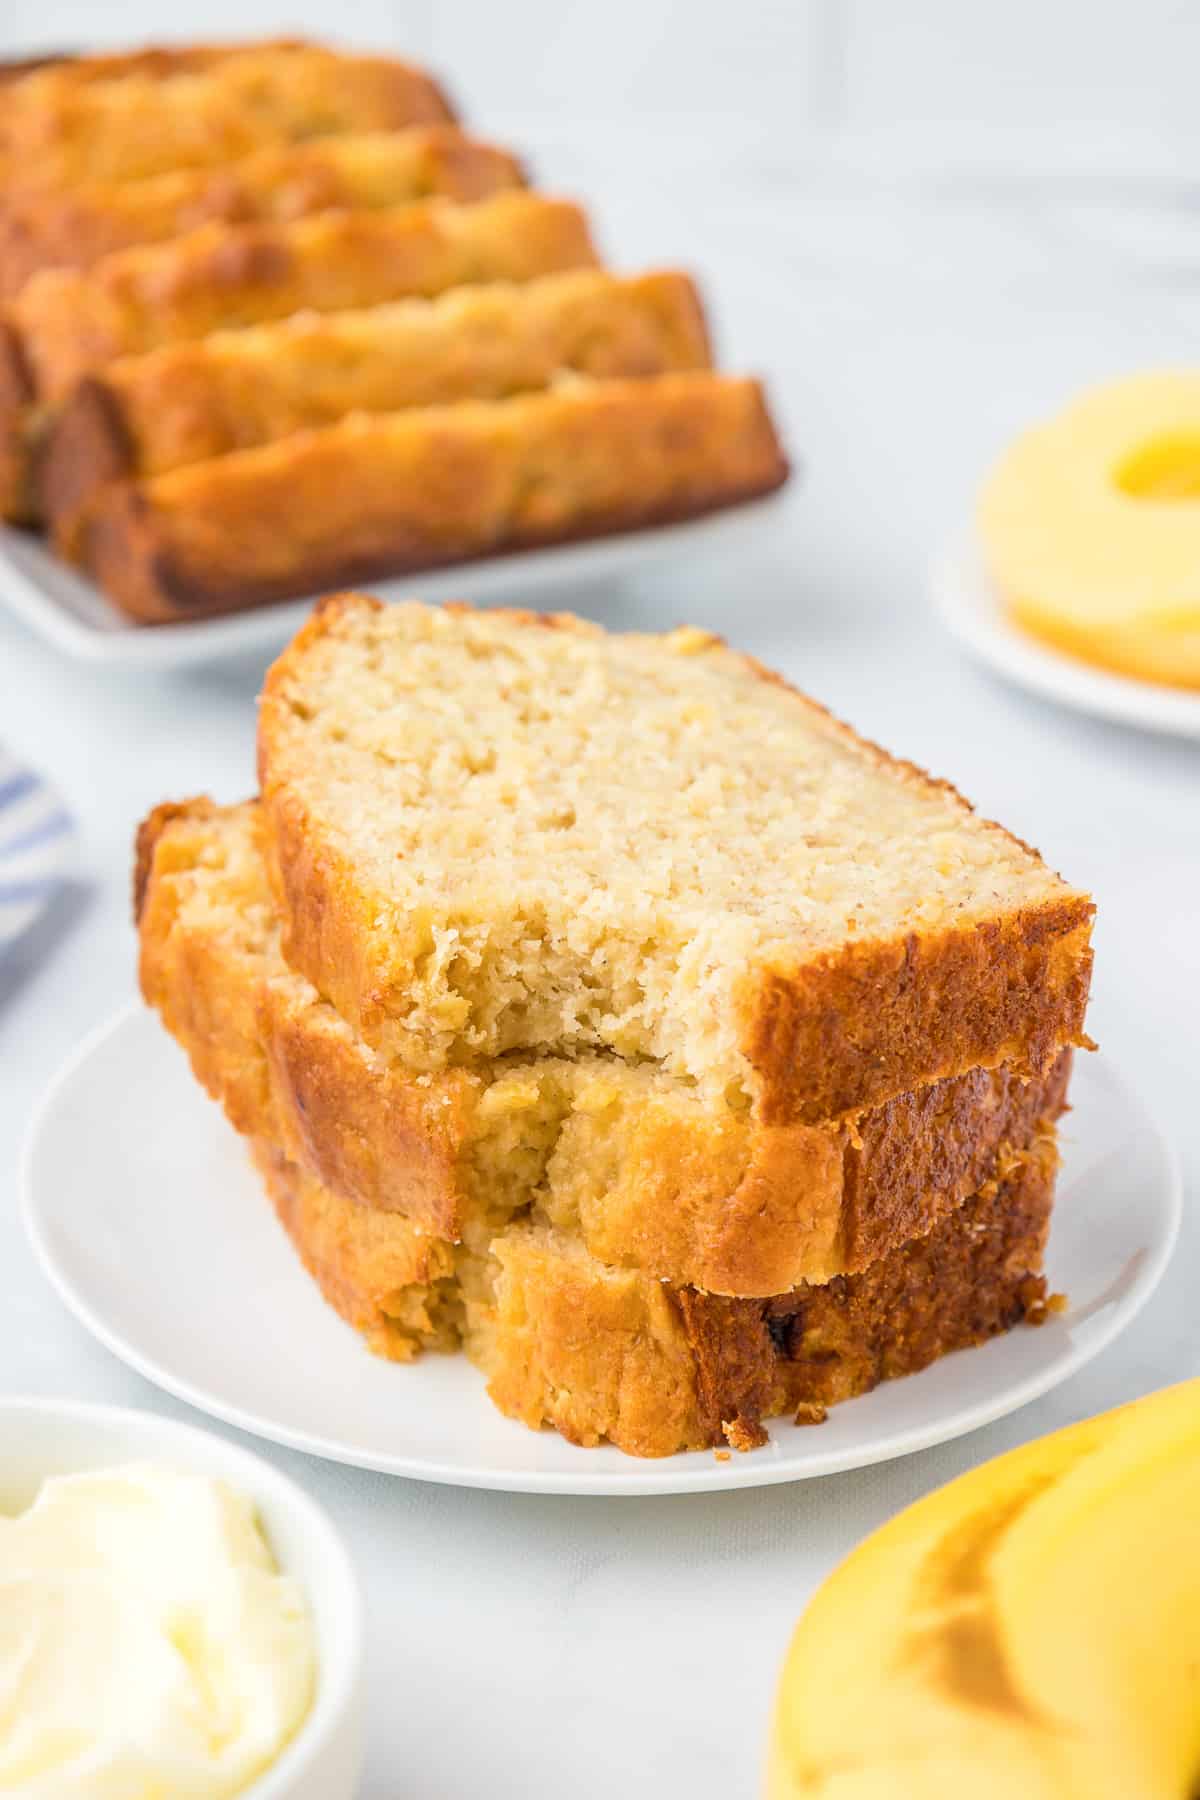 Slices of banana pineapple bread stacked on a plate with the top slice missing the bite and more slices in the background.